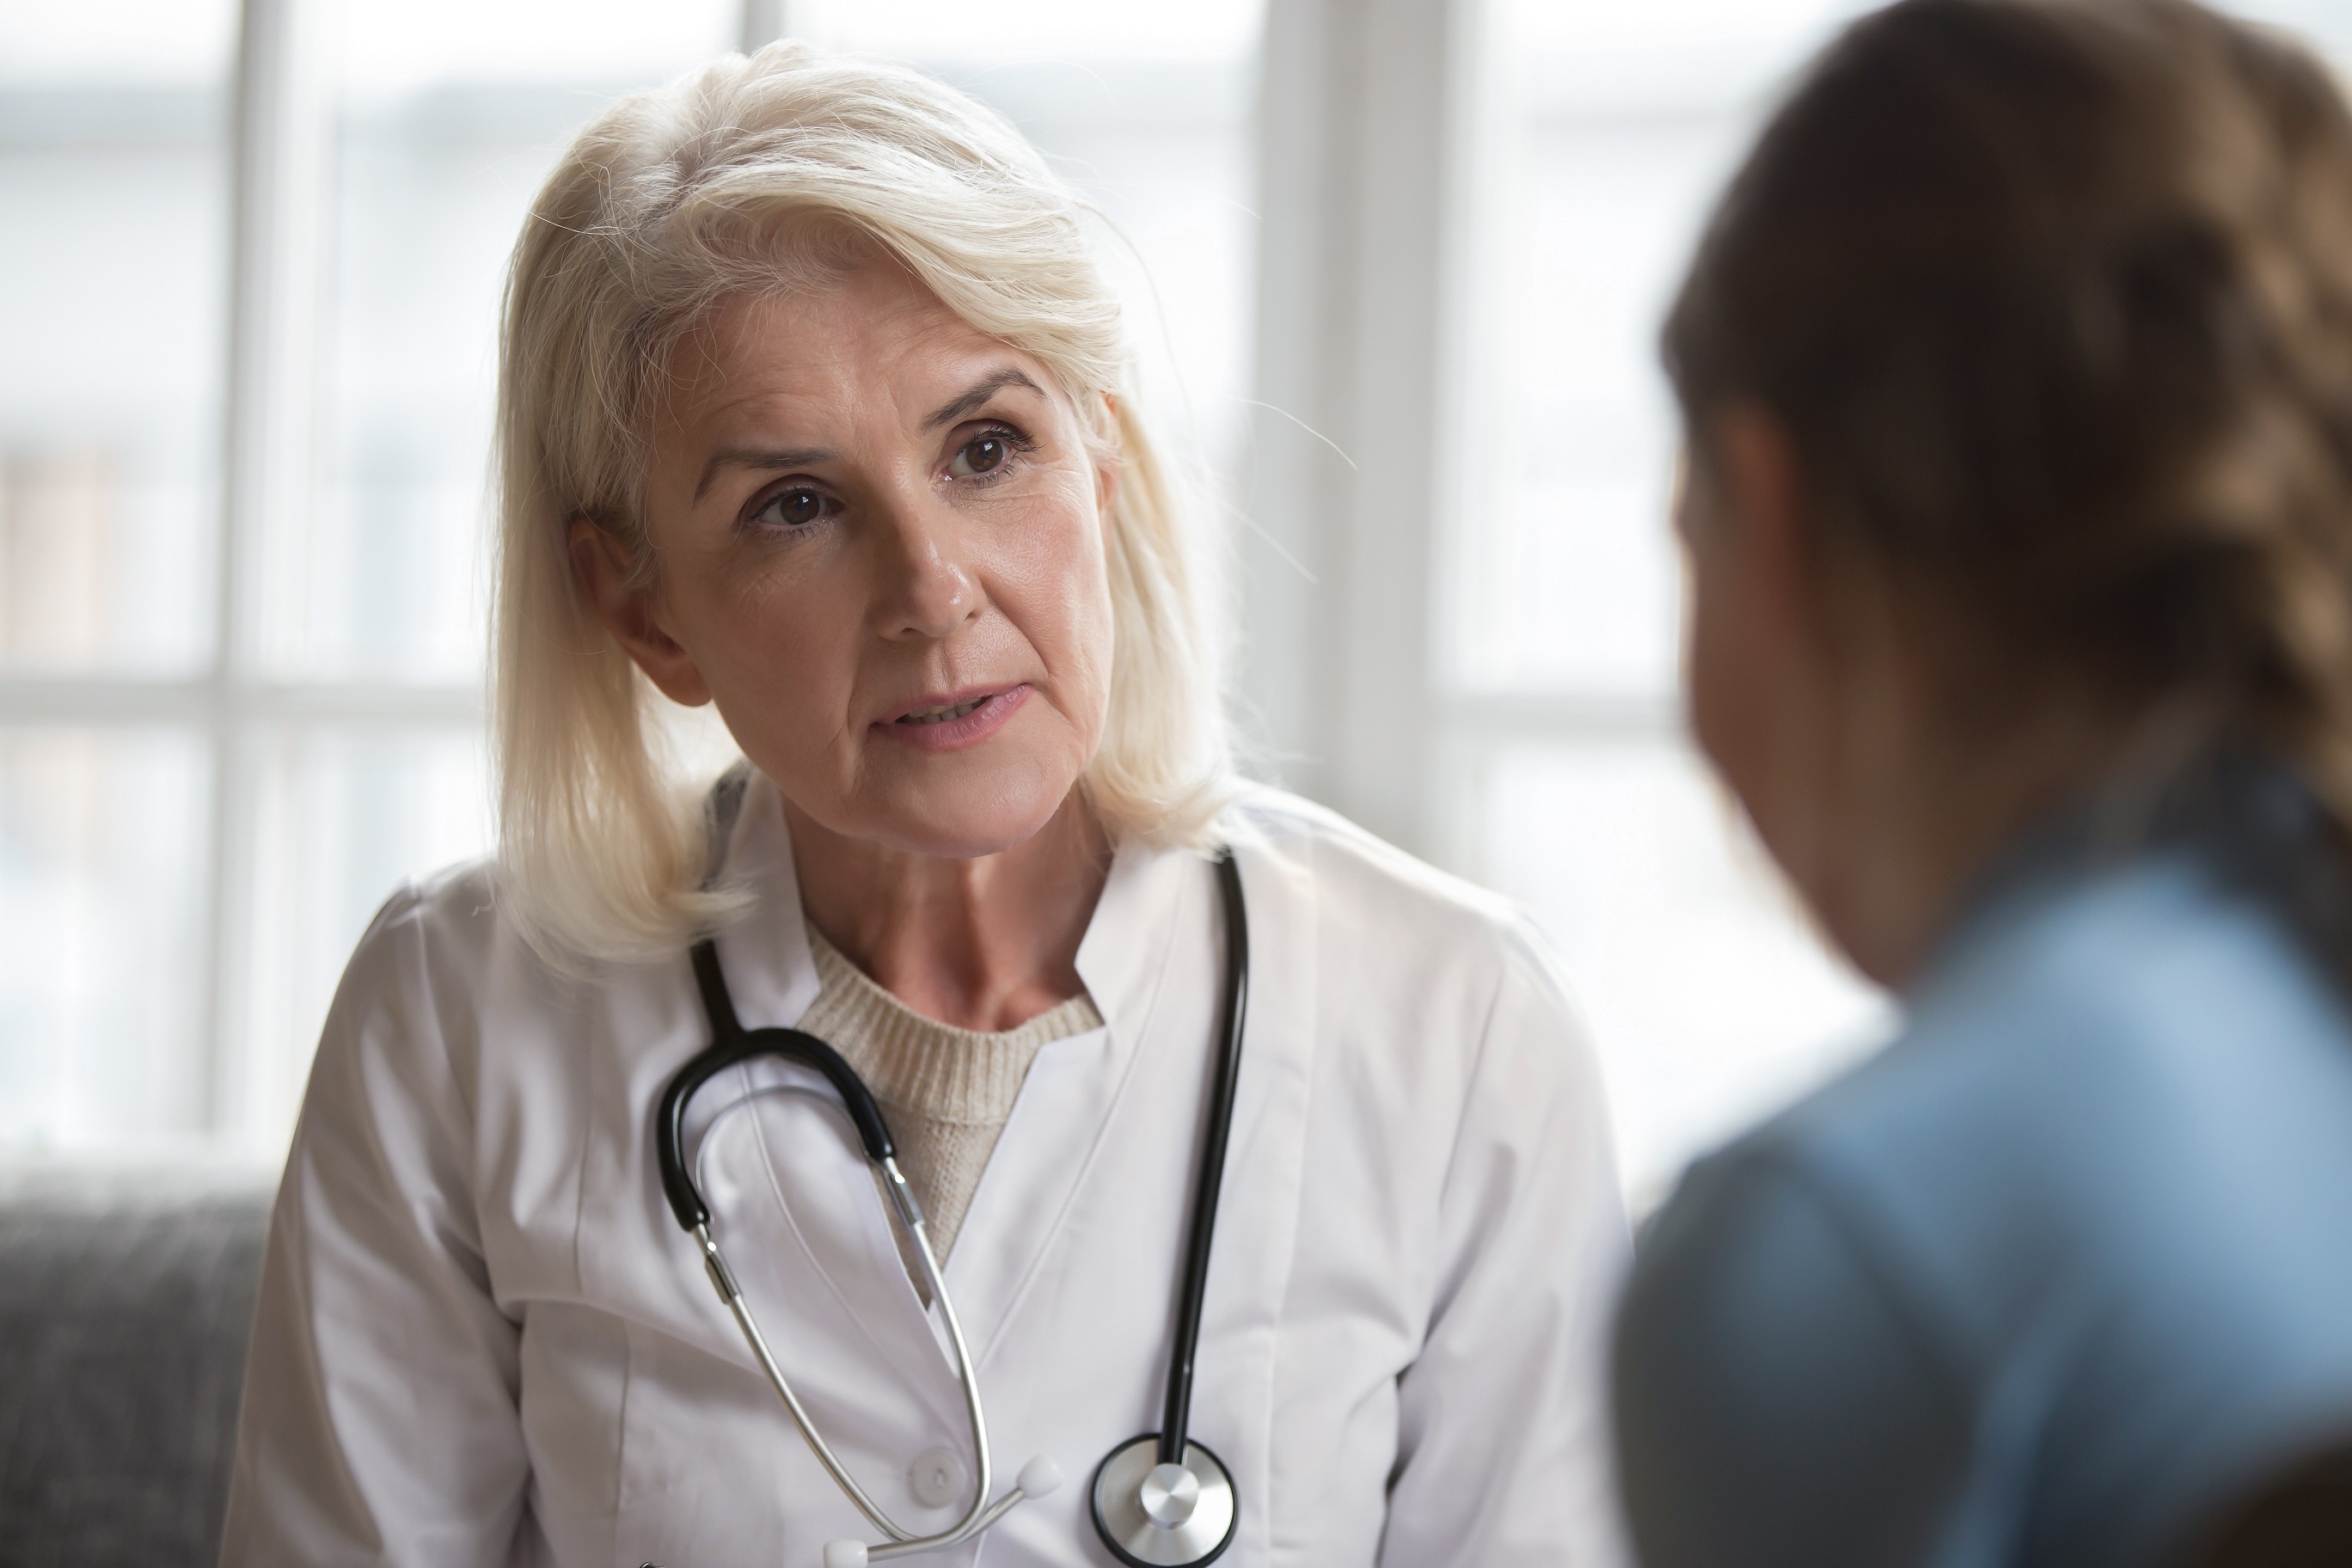 Types of Uterine Cancer: When to Refer to a Specialist